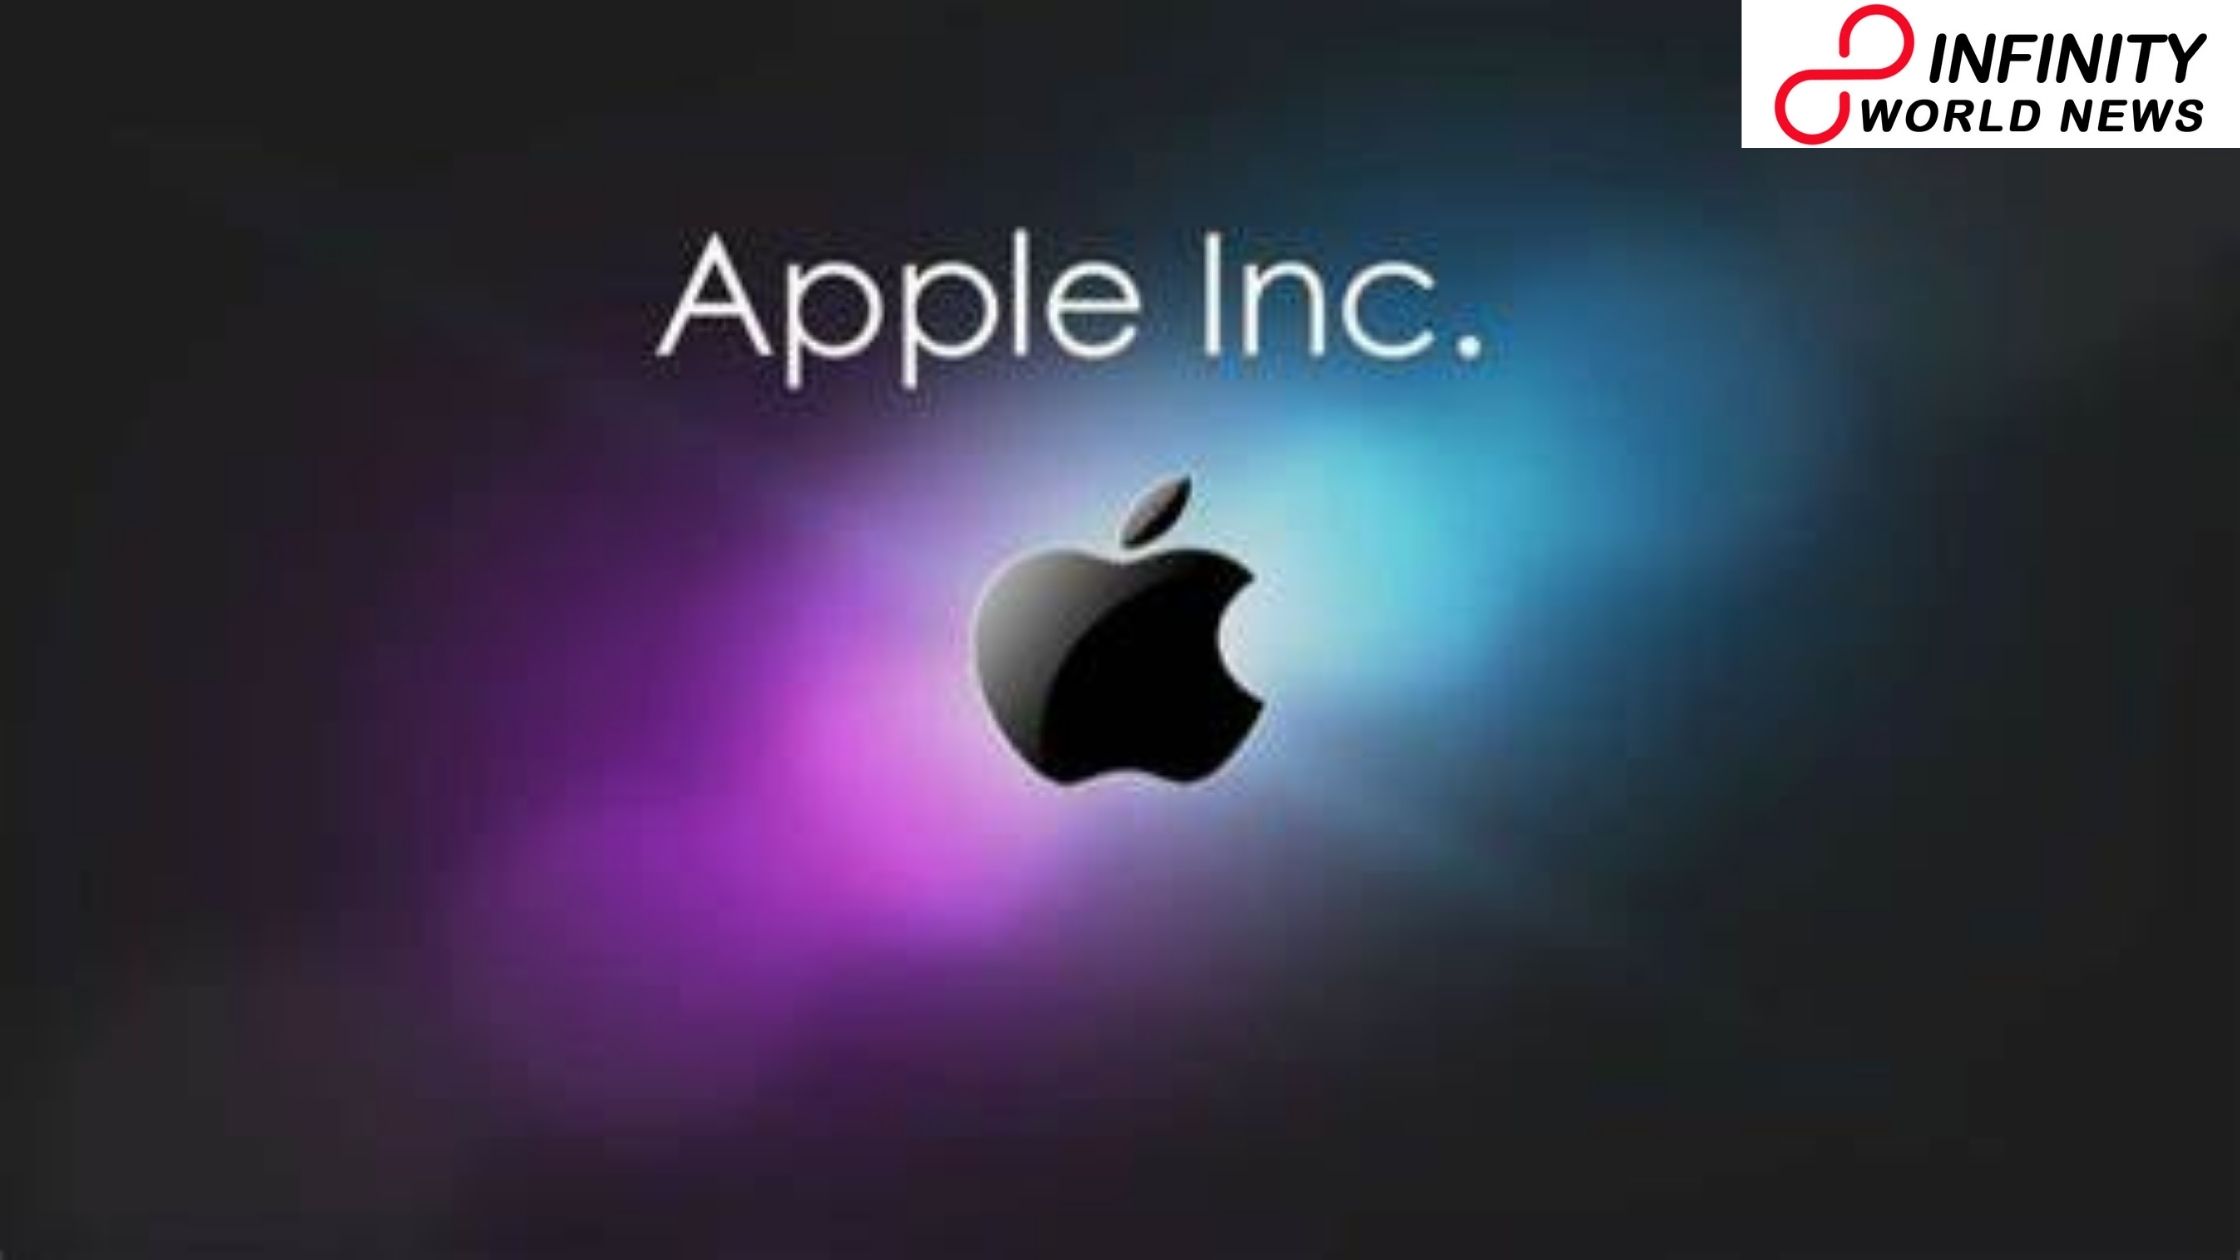 Apple's self-driving vehicle to highlight advancement battery innovation